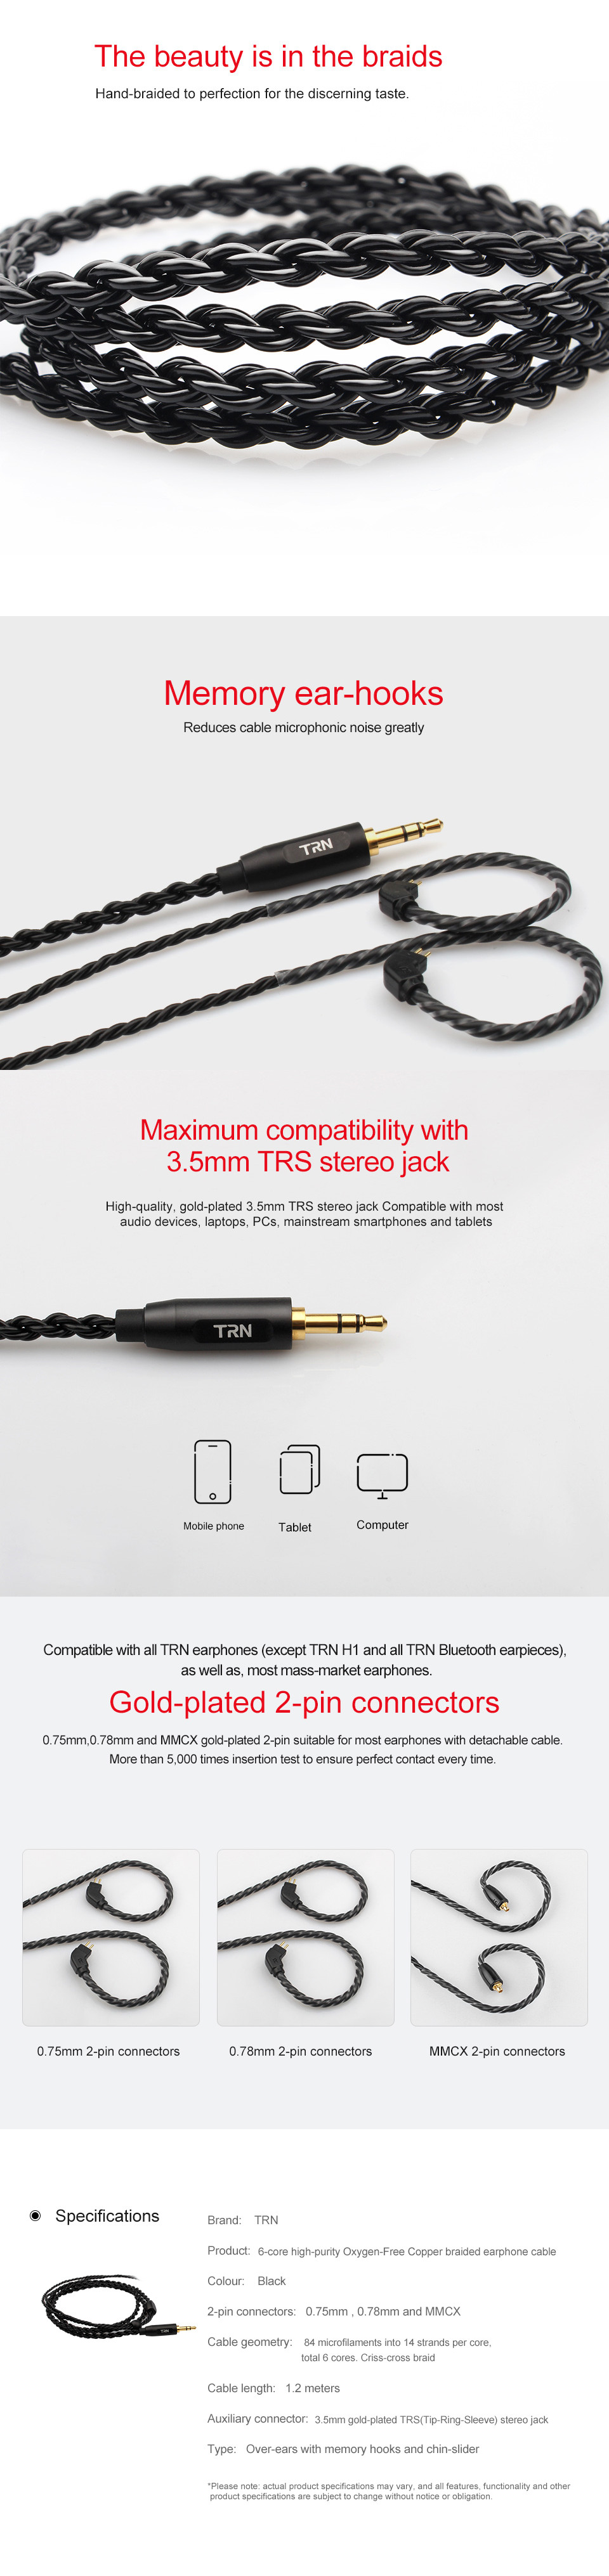 TRN-6-core-Oxygen-Free-Copper-Braided-Earphone-Cable-Hifi-Upgrade-Cable-for-Earphone-Headphones-1471871-2